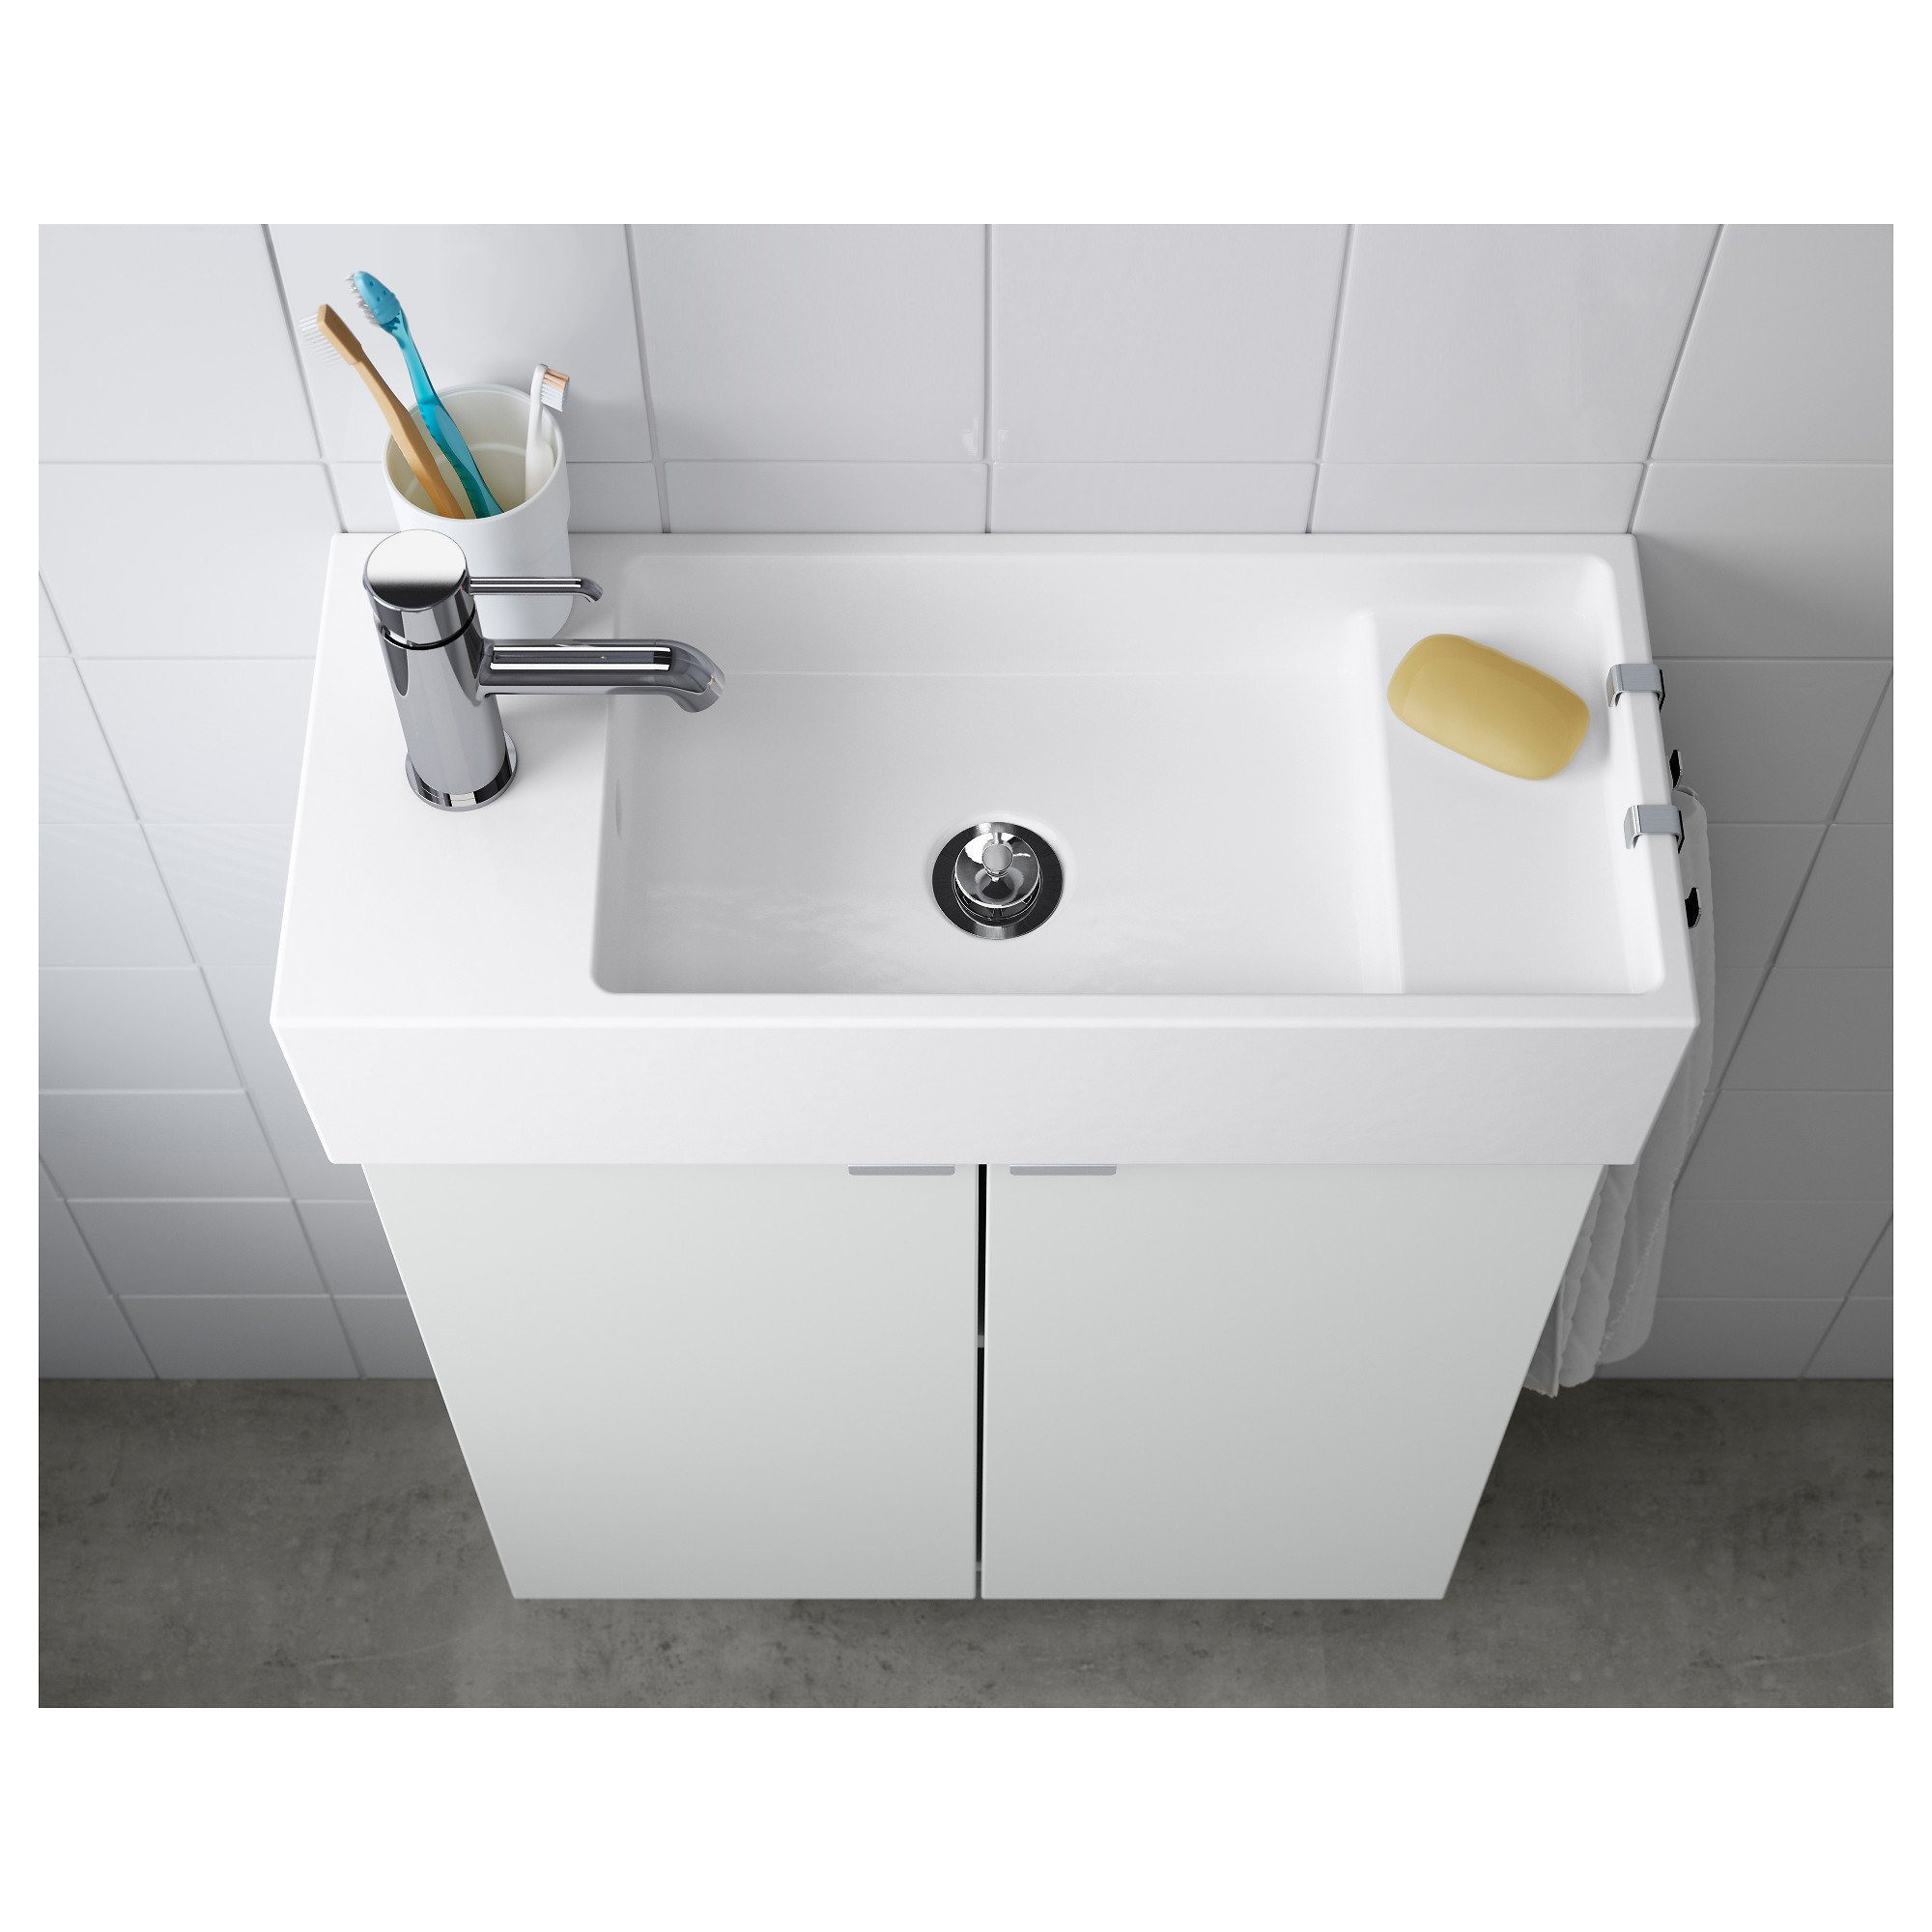 Lovely Sinks with Cabinets for Small Bathrooms